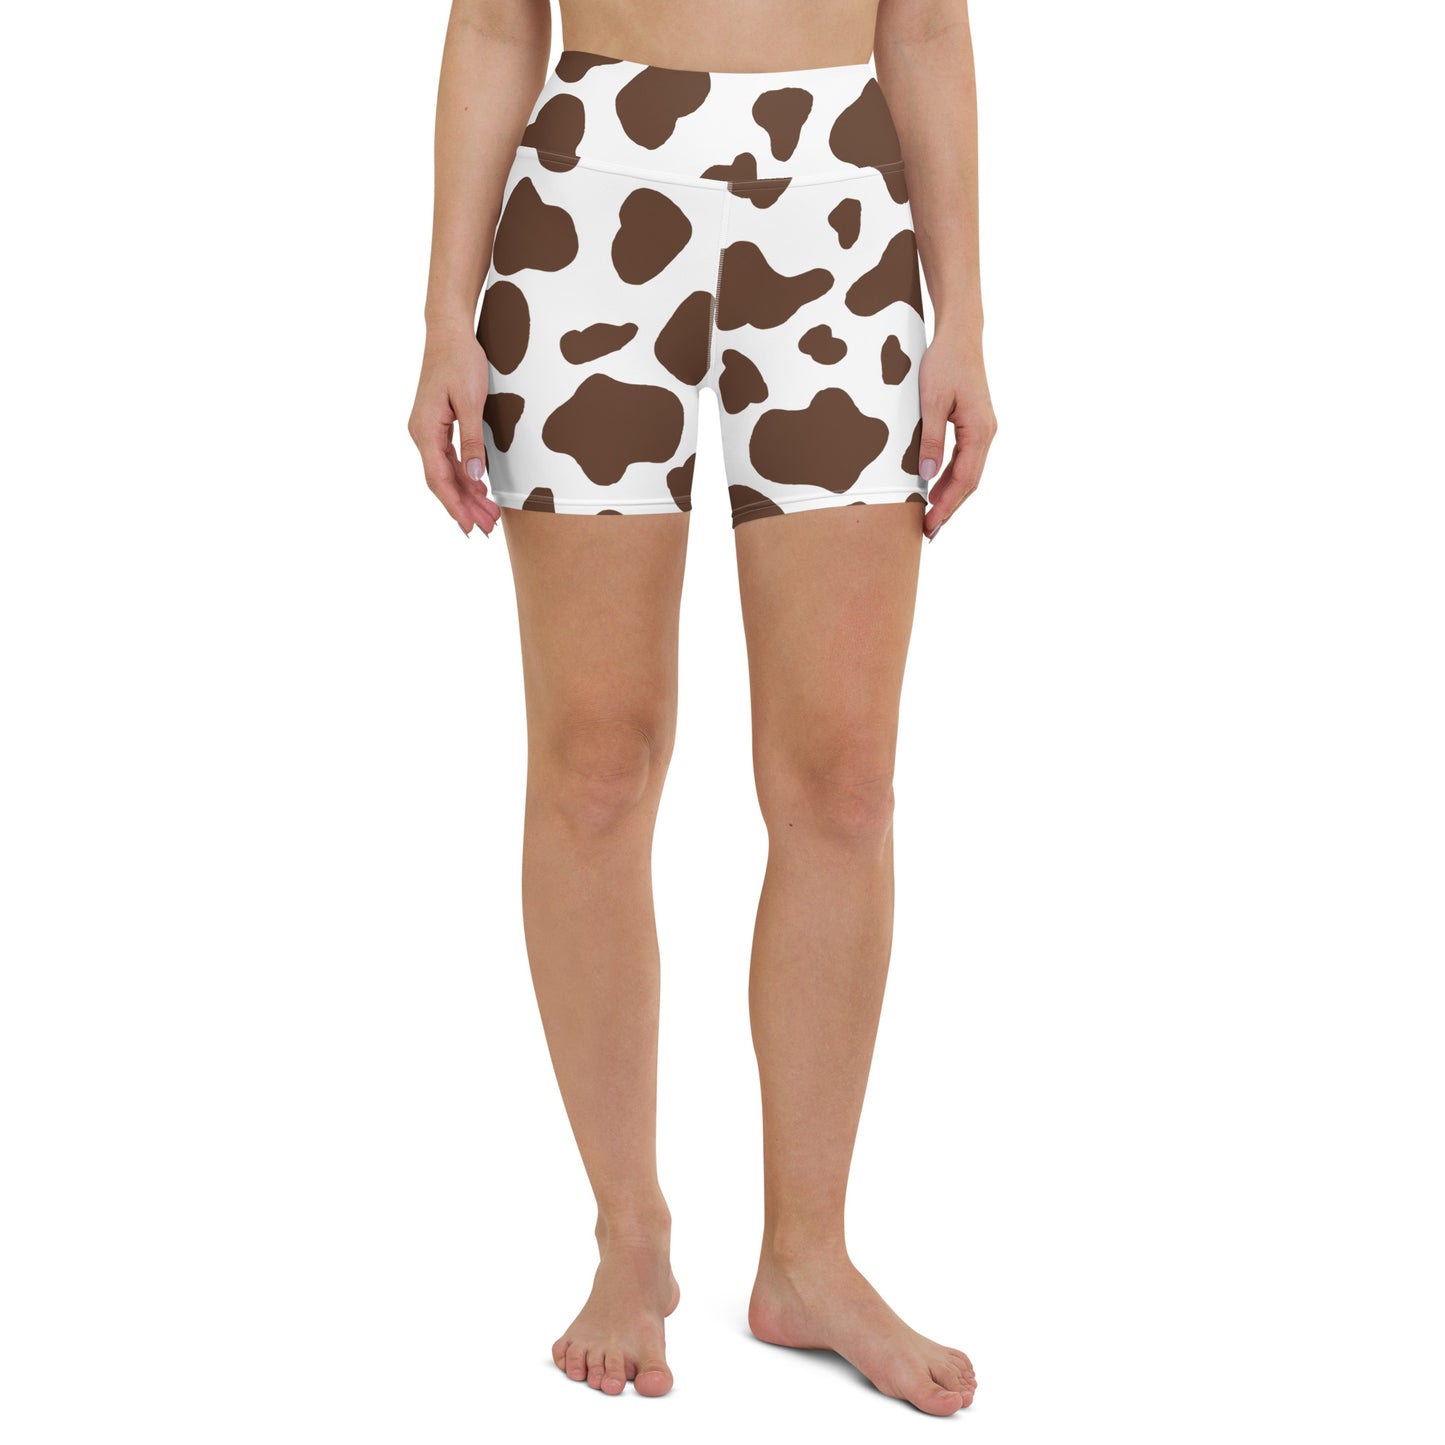 Cow Shorts